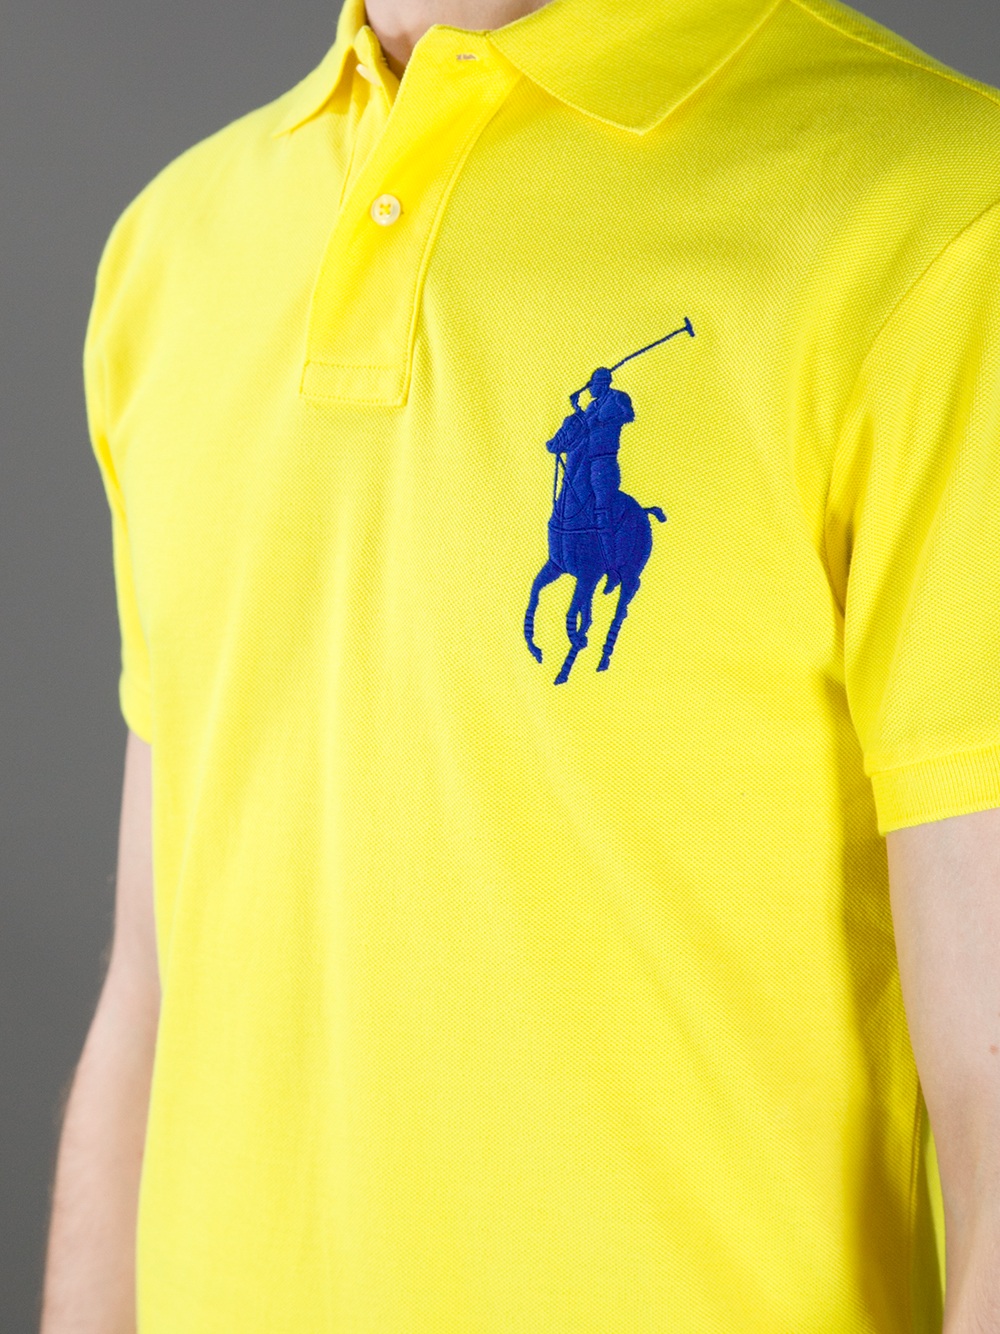 Polo Ralph Lauren Big Pony Polo Shirt in Yellow for Men - Lyst